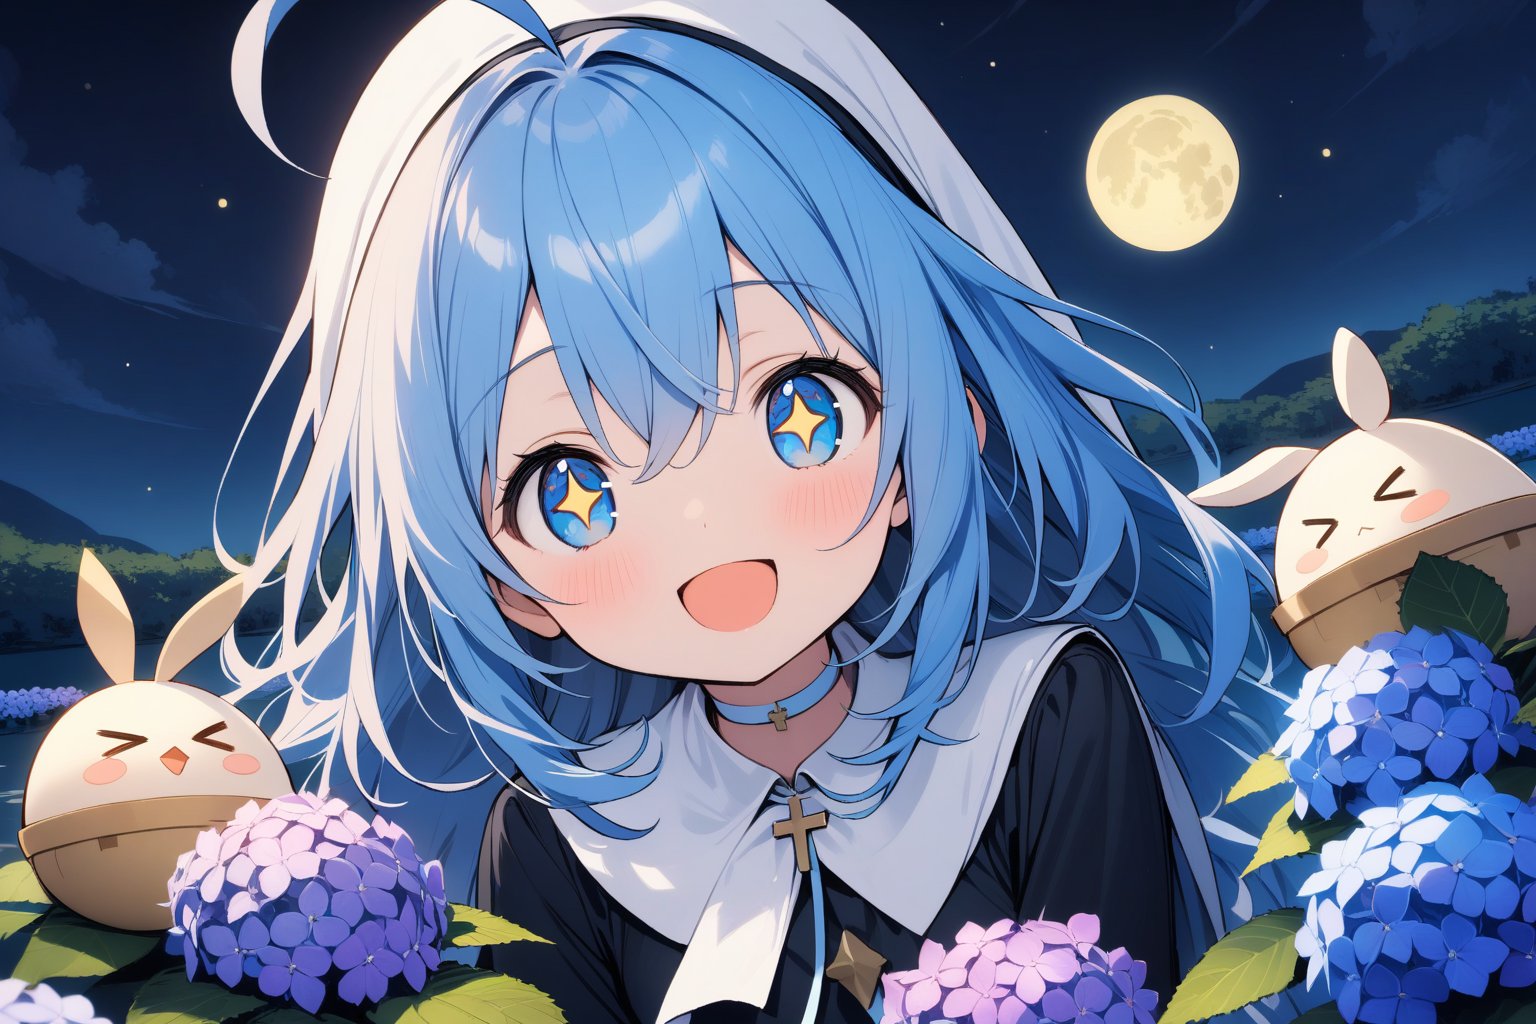 1 little girl, solo, upper body, diagonal angle,
blue hair, long hair, ahoge, blue eyes, +_+, open mouth, smile, cheerful, 
choker, nun outfit, 
hydrangea, Dam lake, 
humpty dumpty, >_<,
night, moon, light up,
masterpiece, best quality, 